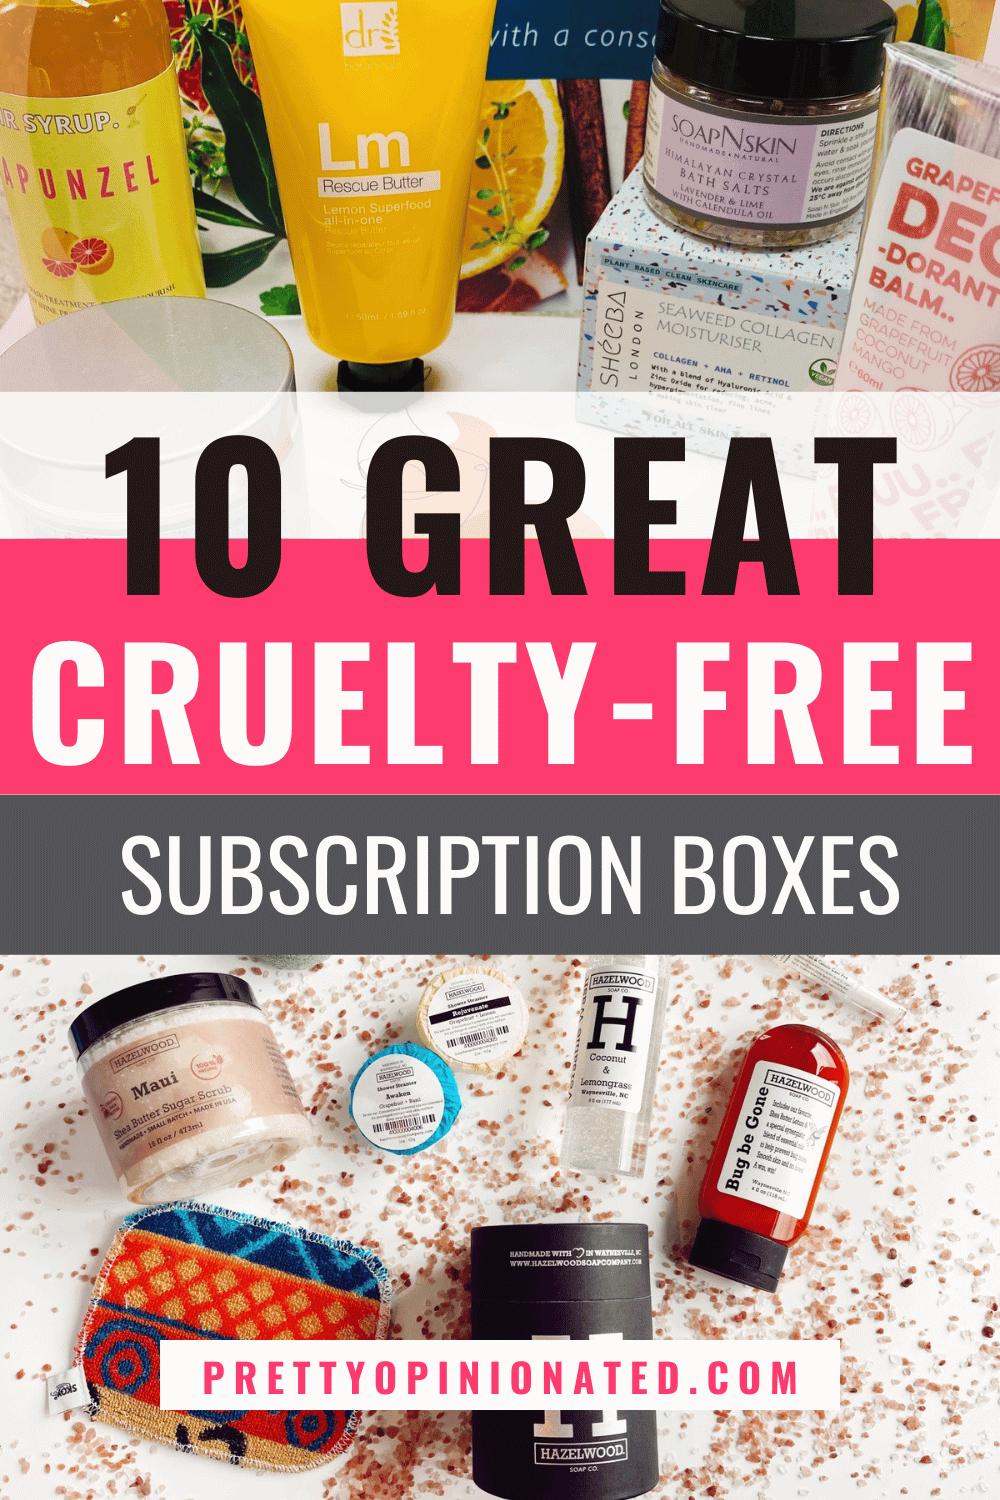 10 Cruelty-Free Makeup and Skincare Subscription Boxes